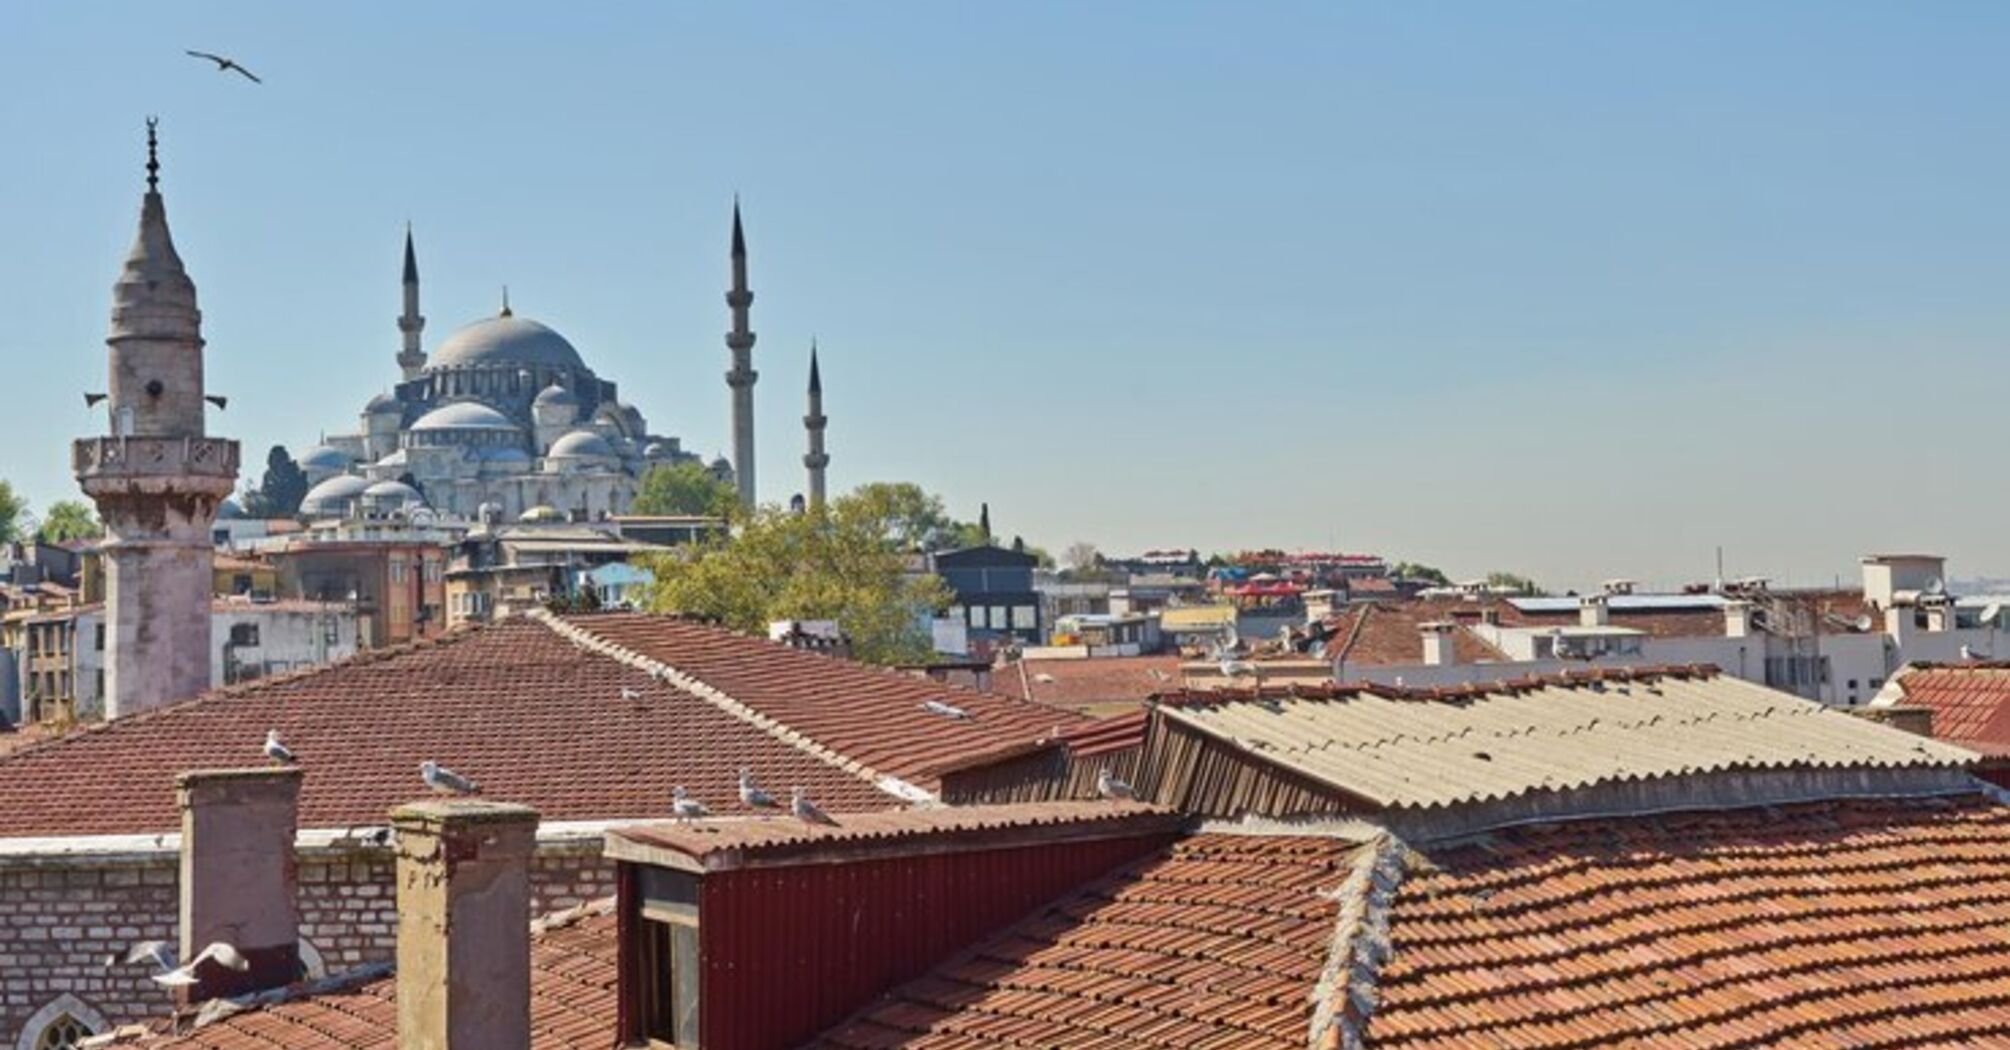 An important rule to know when you go on vacation to Turkey